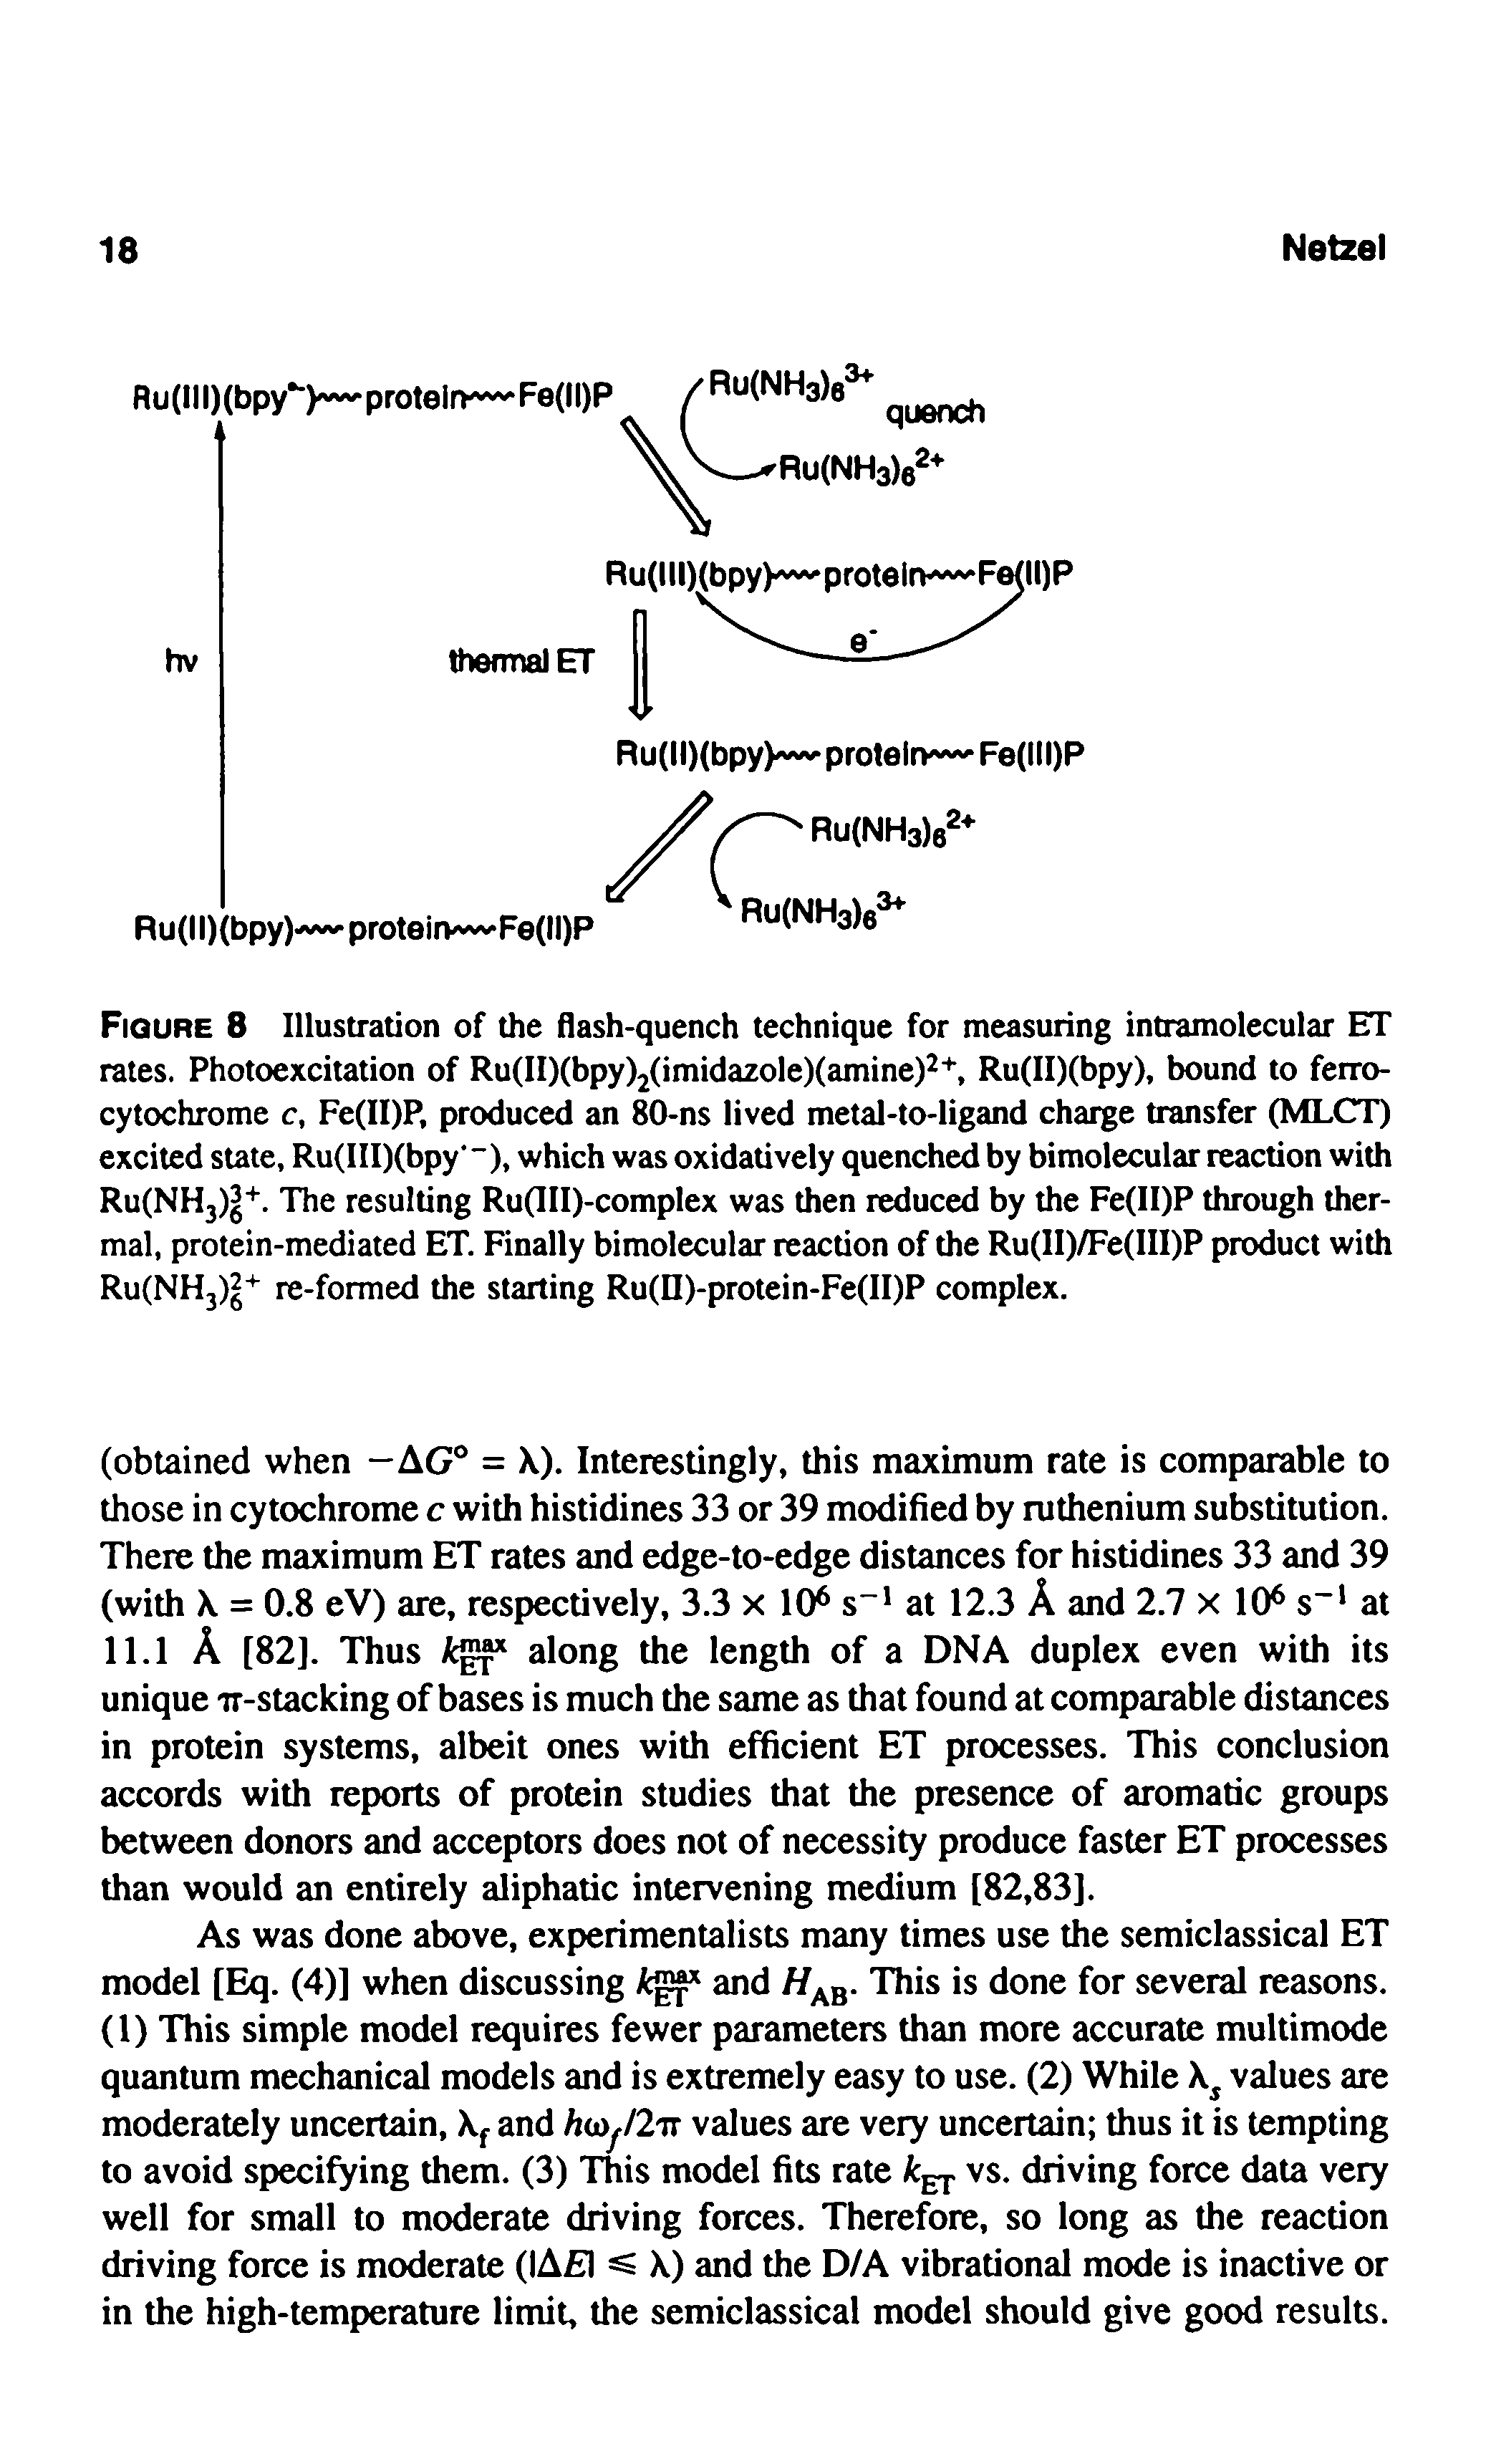 Figure 8 Illustration of the flash-quench technique for measuring intramolecular ET rates. Photoexcitation of Ru(II)(bpy)2(imidazole)(amine)2+, Ru(II)(bpy), bound to ferro-cytochrome c, Fe(II)P, produced an 80-ns lived metal-to-ligand charge transfer (MLCT) excited state, Ru(III)(bpy -), which was oxidatively quenched by bimolecular reaction with Ru(NH3) +. The resulting Ru(III)-complex was then reduced by the Fe(II)P through thermal, protein-mediated ET. Finally bimolecular reaction of the Ru(II)/Fe(III)P product with Ru(NH3) + re-formed the starting Ru(II)-protein-Fe(II)P complex.